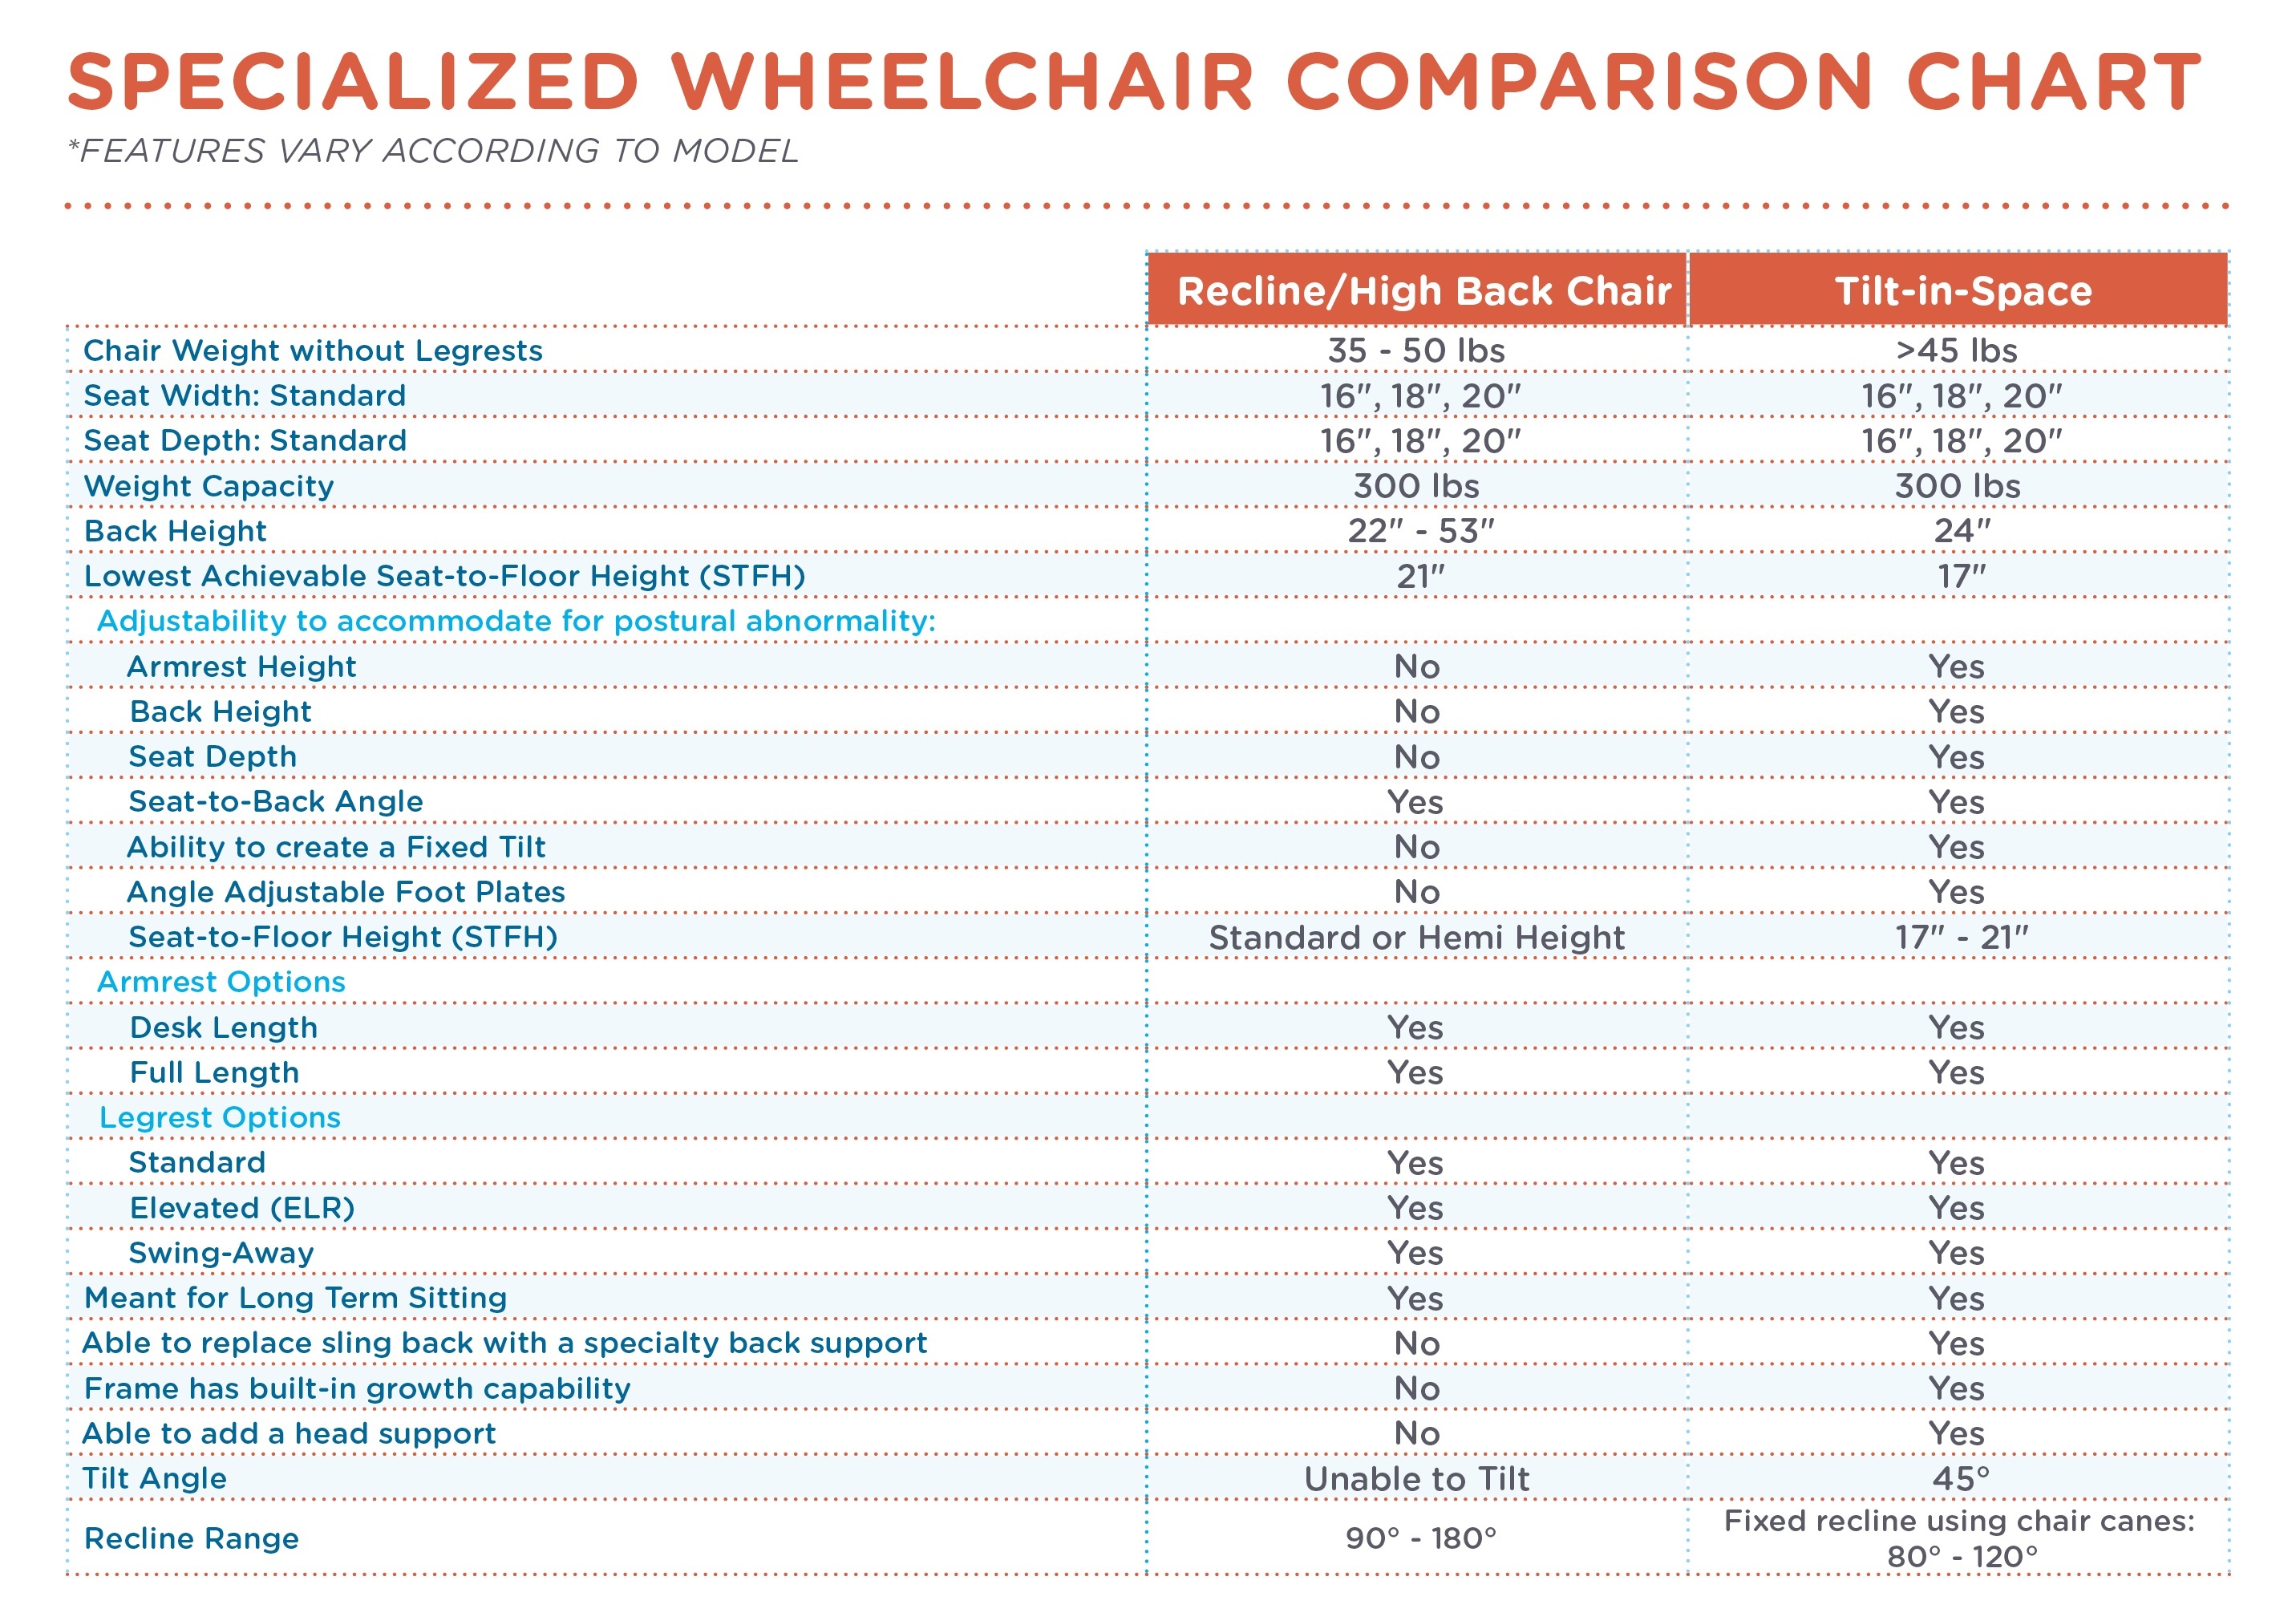 The Best Wheelchair Options in Long Term Care